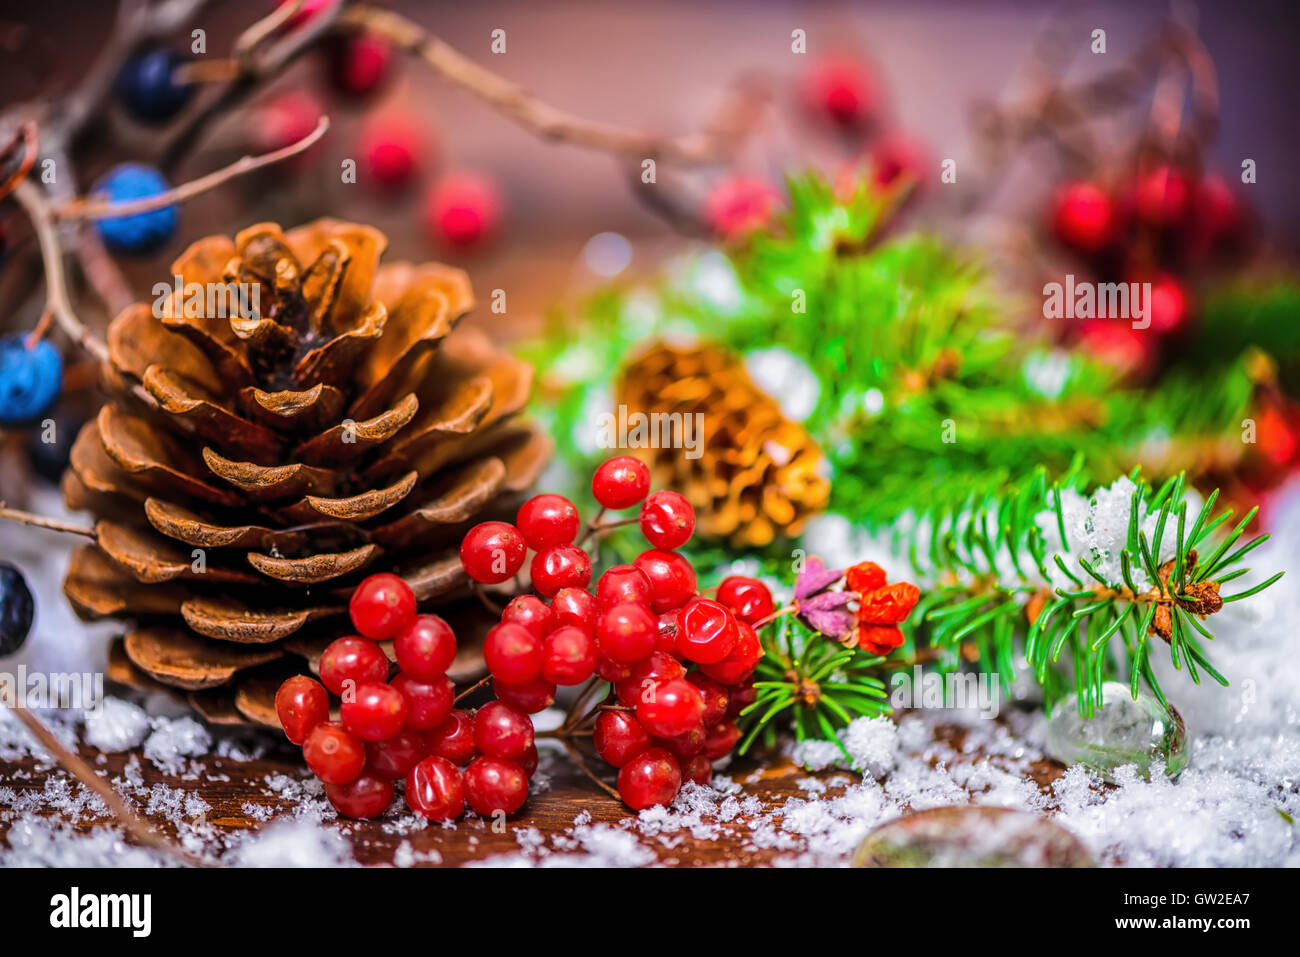 Thanksgiving holiday greeting card with autumn fruit, apple, nuts, cones, berries, fir tree and snow, rural style, close up Stock Photo